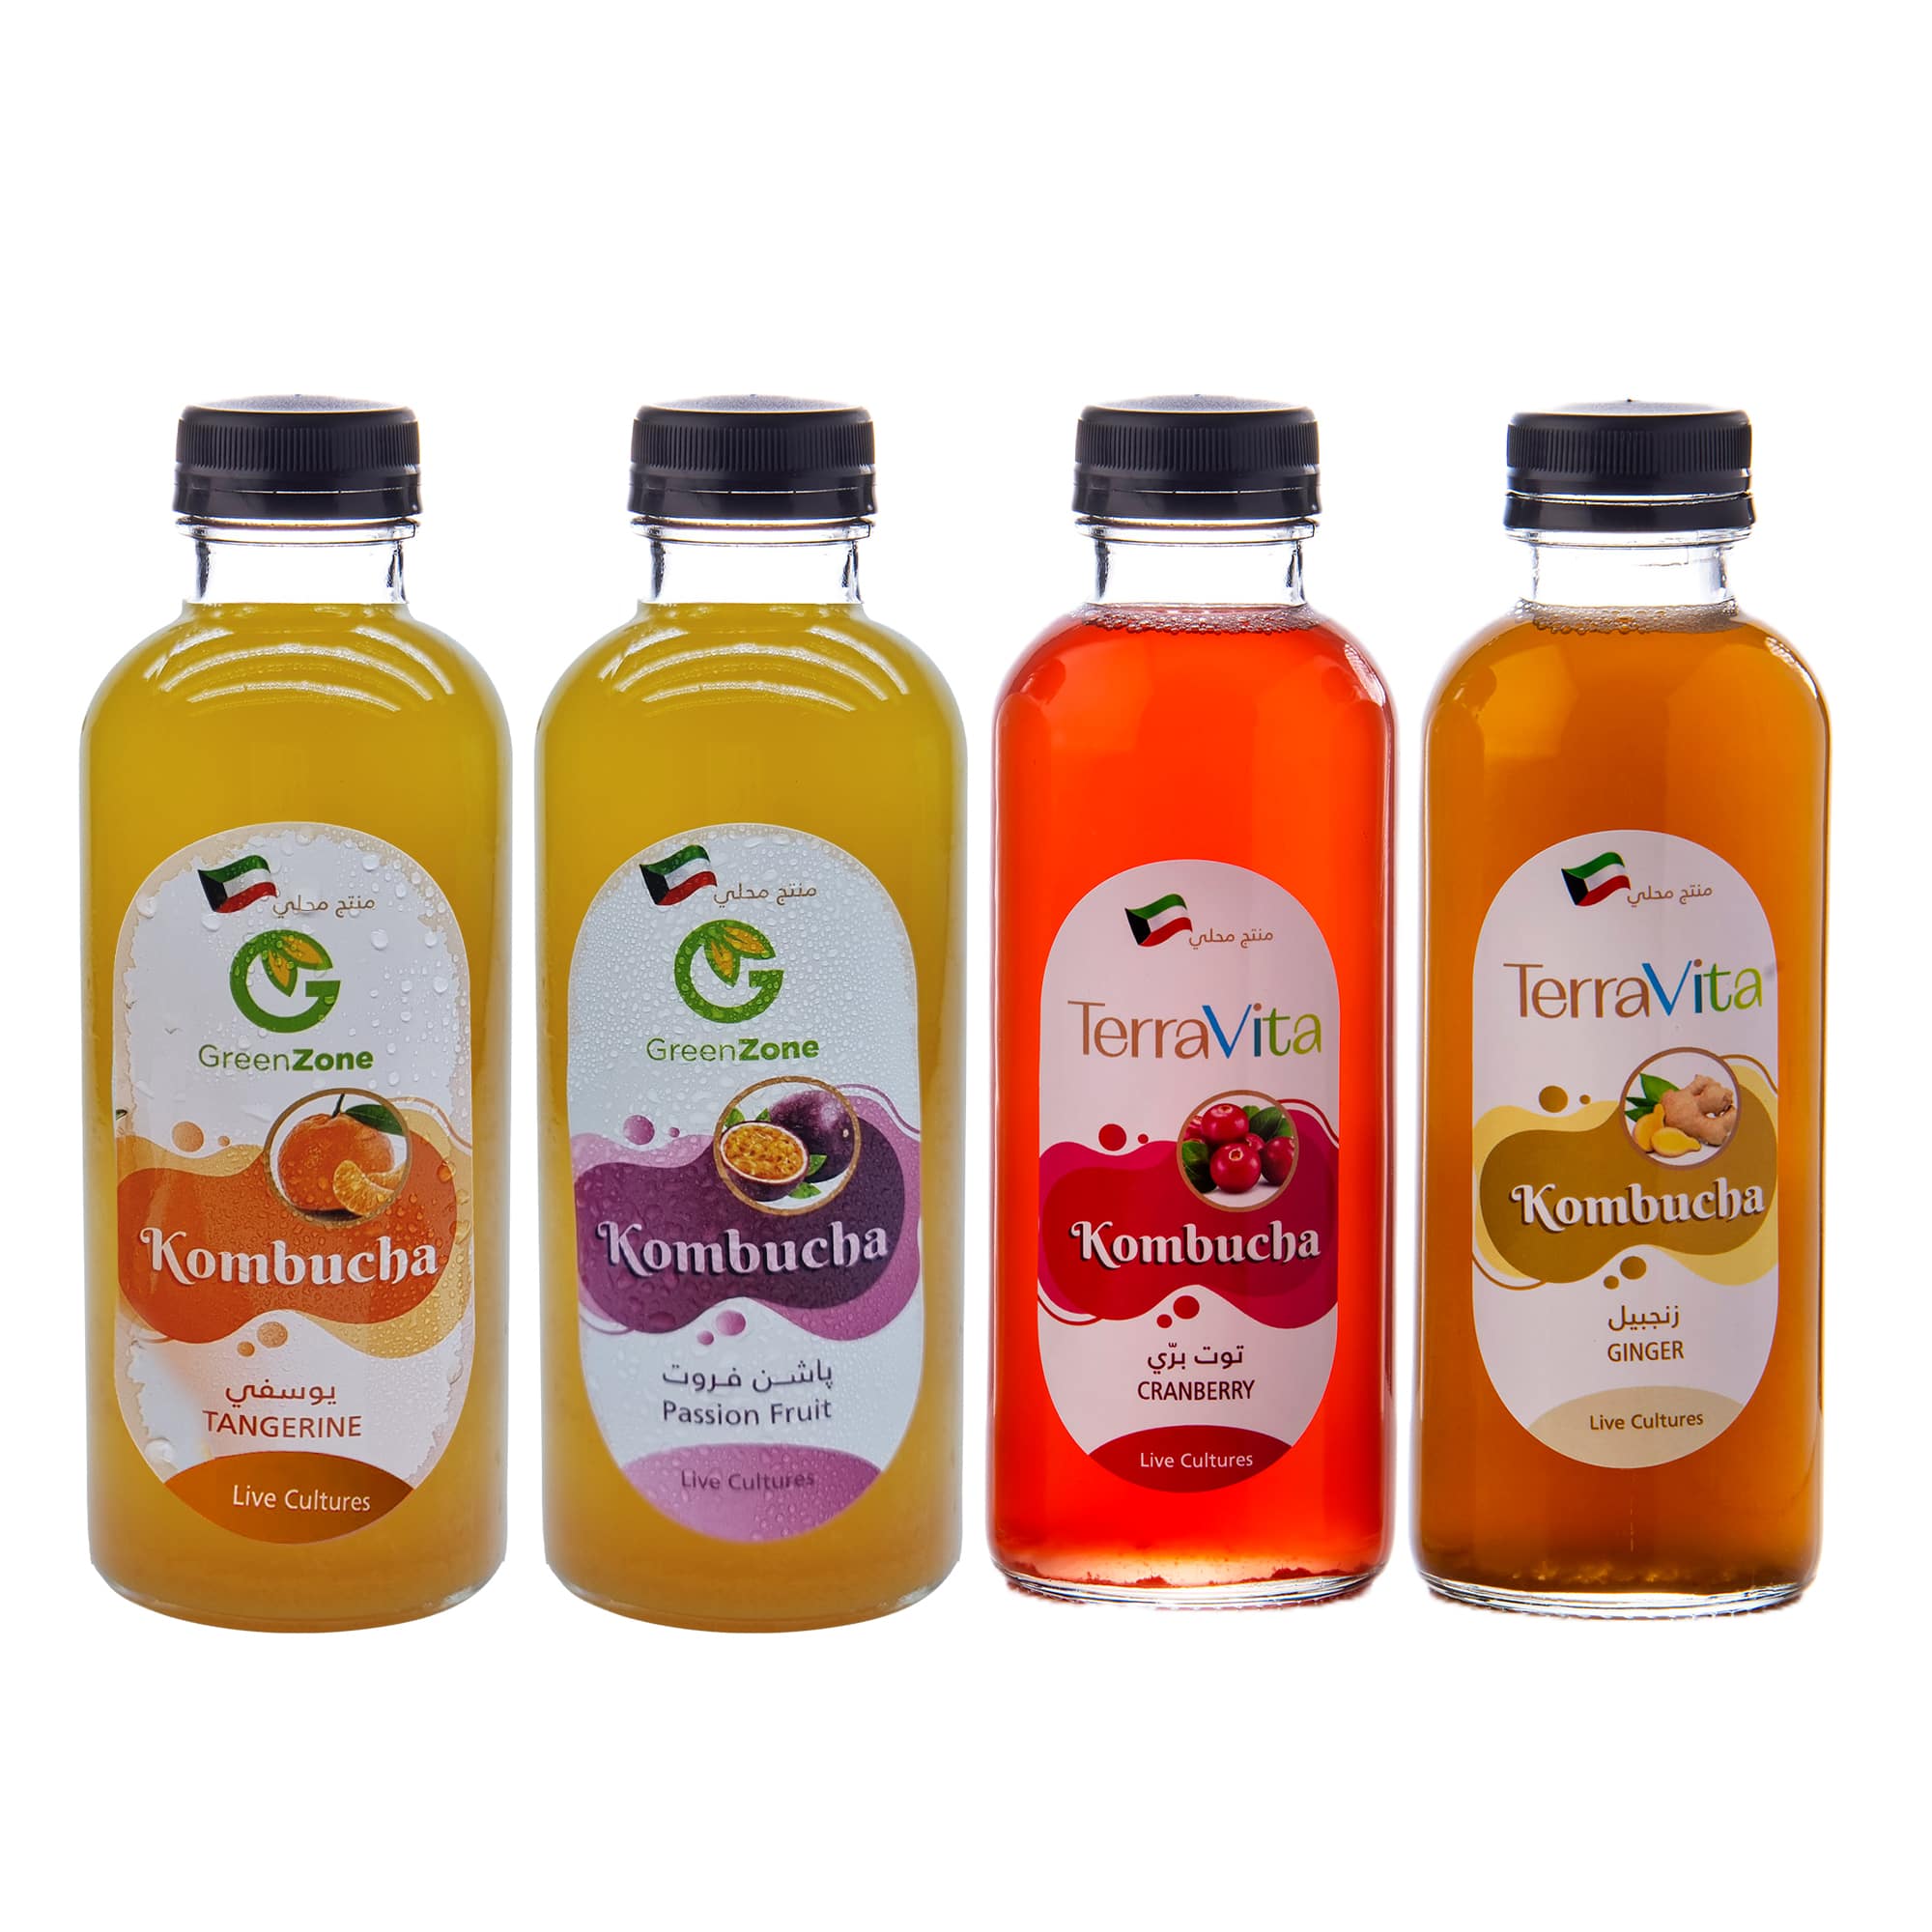 Create your Own Mix of Kombucha Flavours